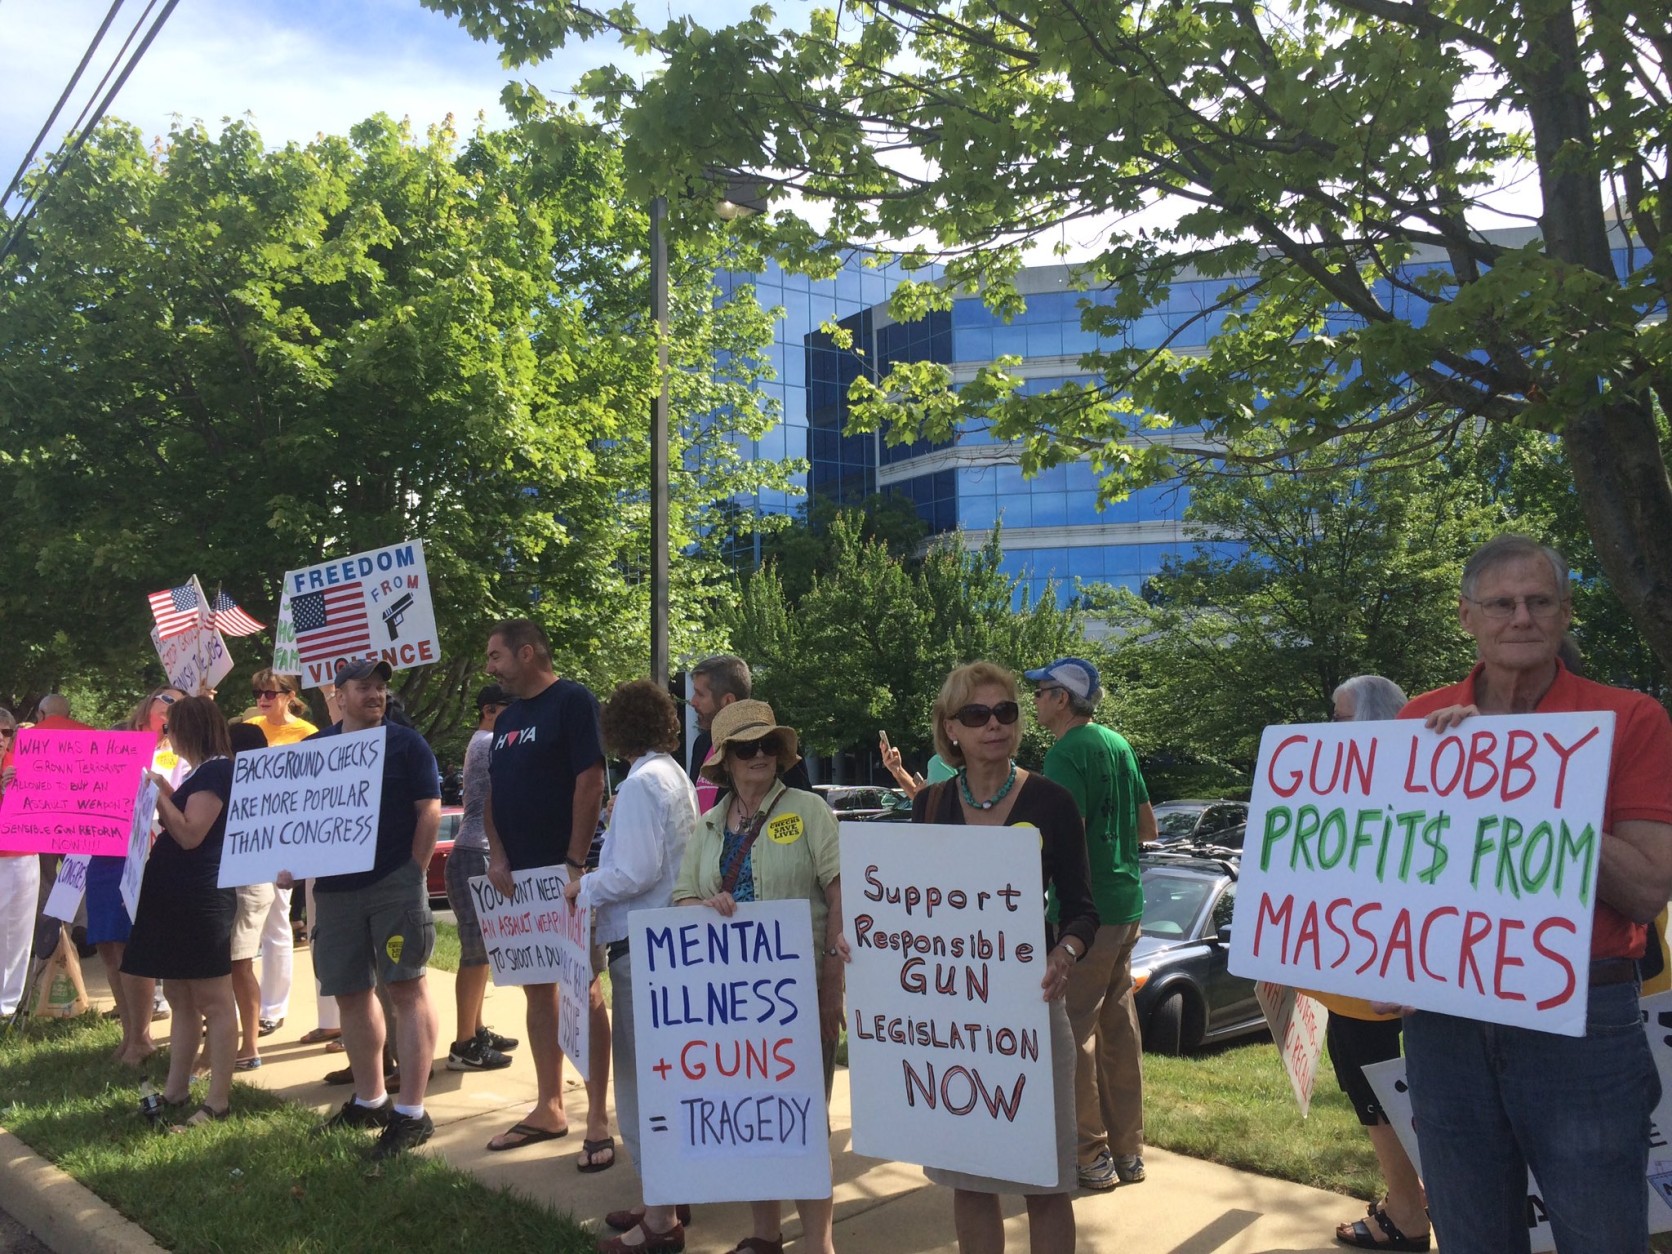 Protesters outside NRA headquarters in Fairfax, Virginia, call for gun control laws. (WTOP/Nick Iannelli)